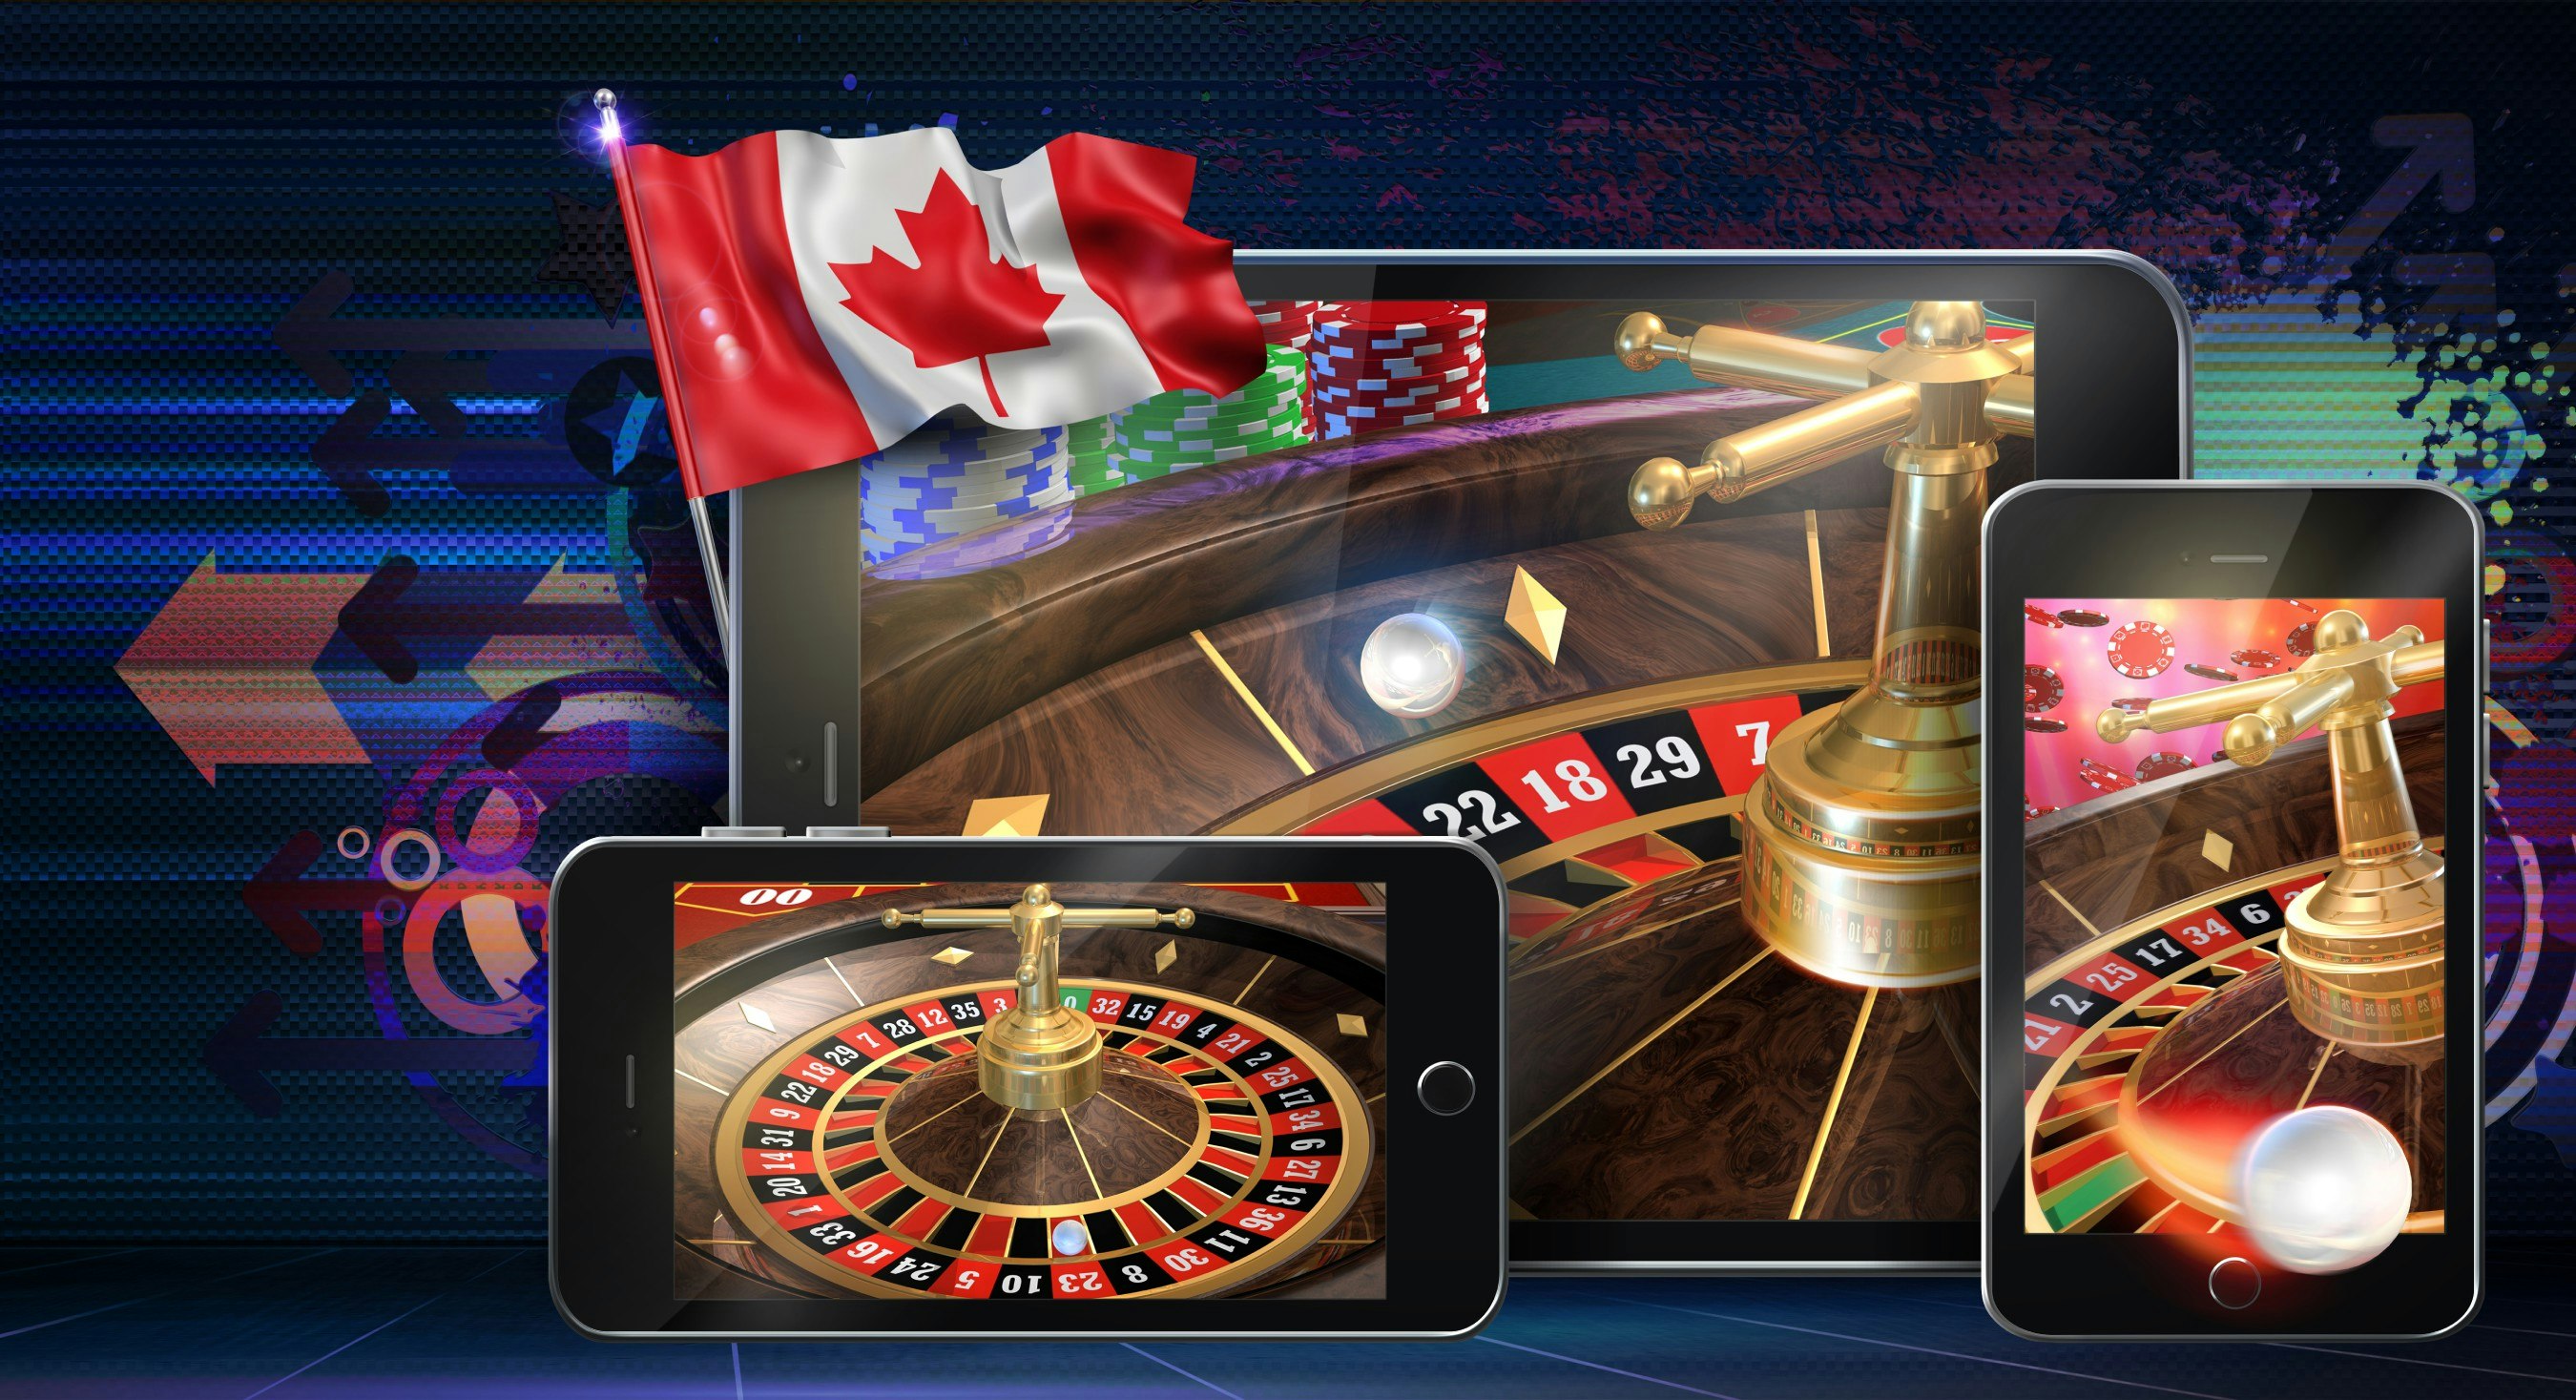 Gambling in Canada: Why are online casinos on the rise?